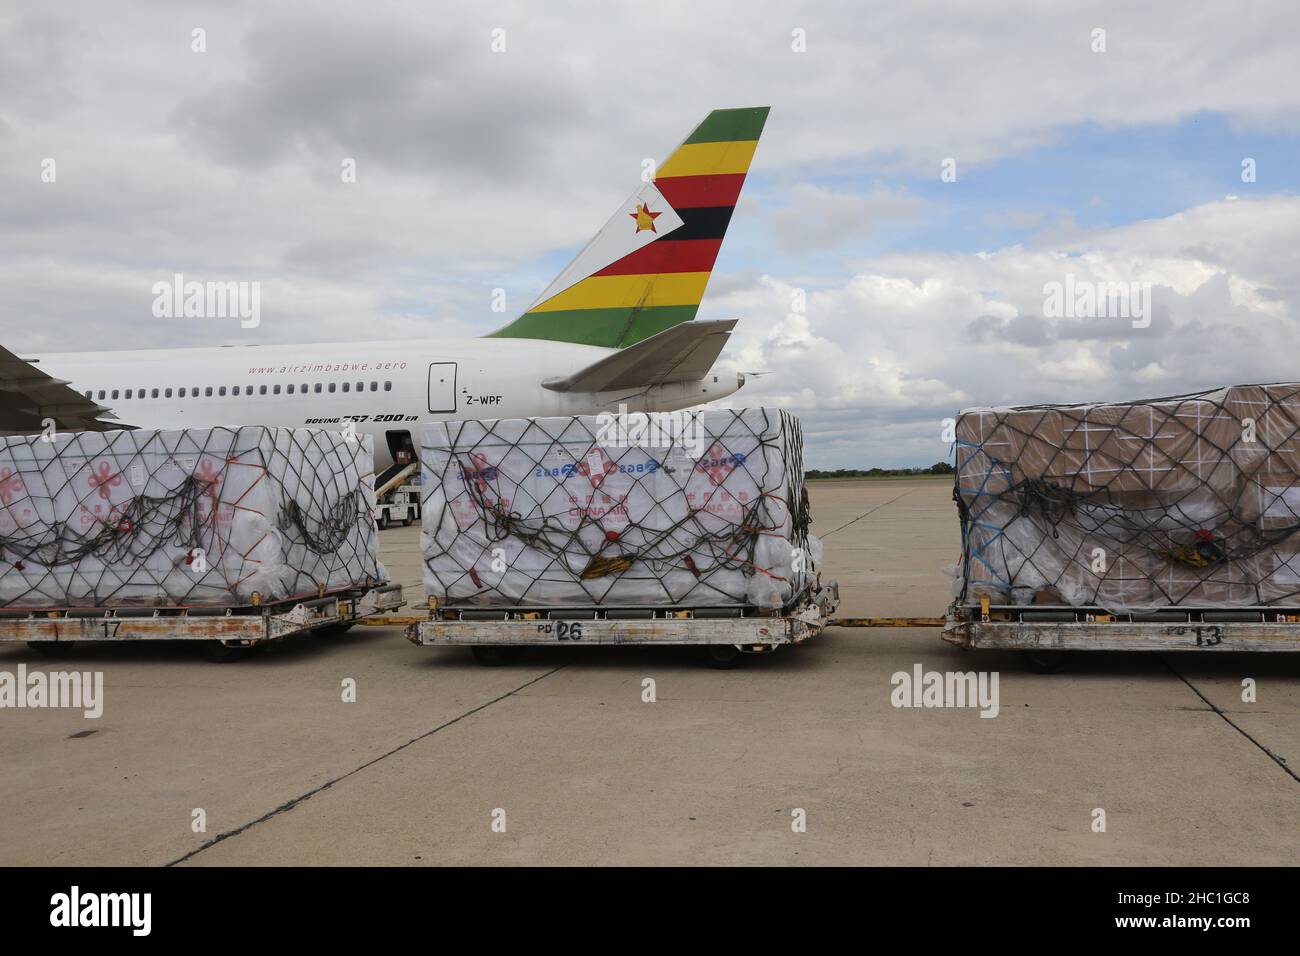 Harare, Zimbabwe. 20th Dec, 2021. A batch of COVID-19 vaccine donated by China arrives at Robert Gabriel Mugabe International Airport in Harare, Zimbabwe, on Dec. 20, 2021. Zimbabwe on Monday received a batch of Sinovac COVID-19 vaccine donated by China, which will boost the country's vaccination campaign as it battles the fourth wave of COVID-19 pandemic. Credit: Zhang Yuliang/Xinhua/Alamy Live News Stock Photo